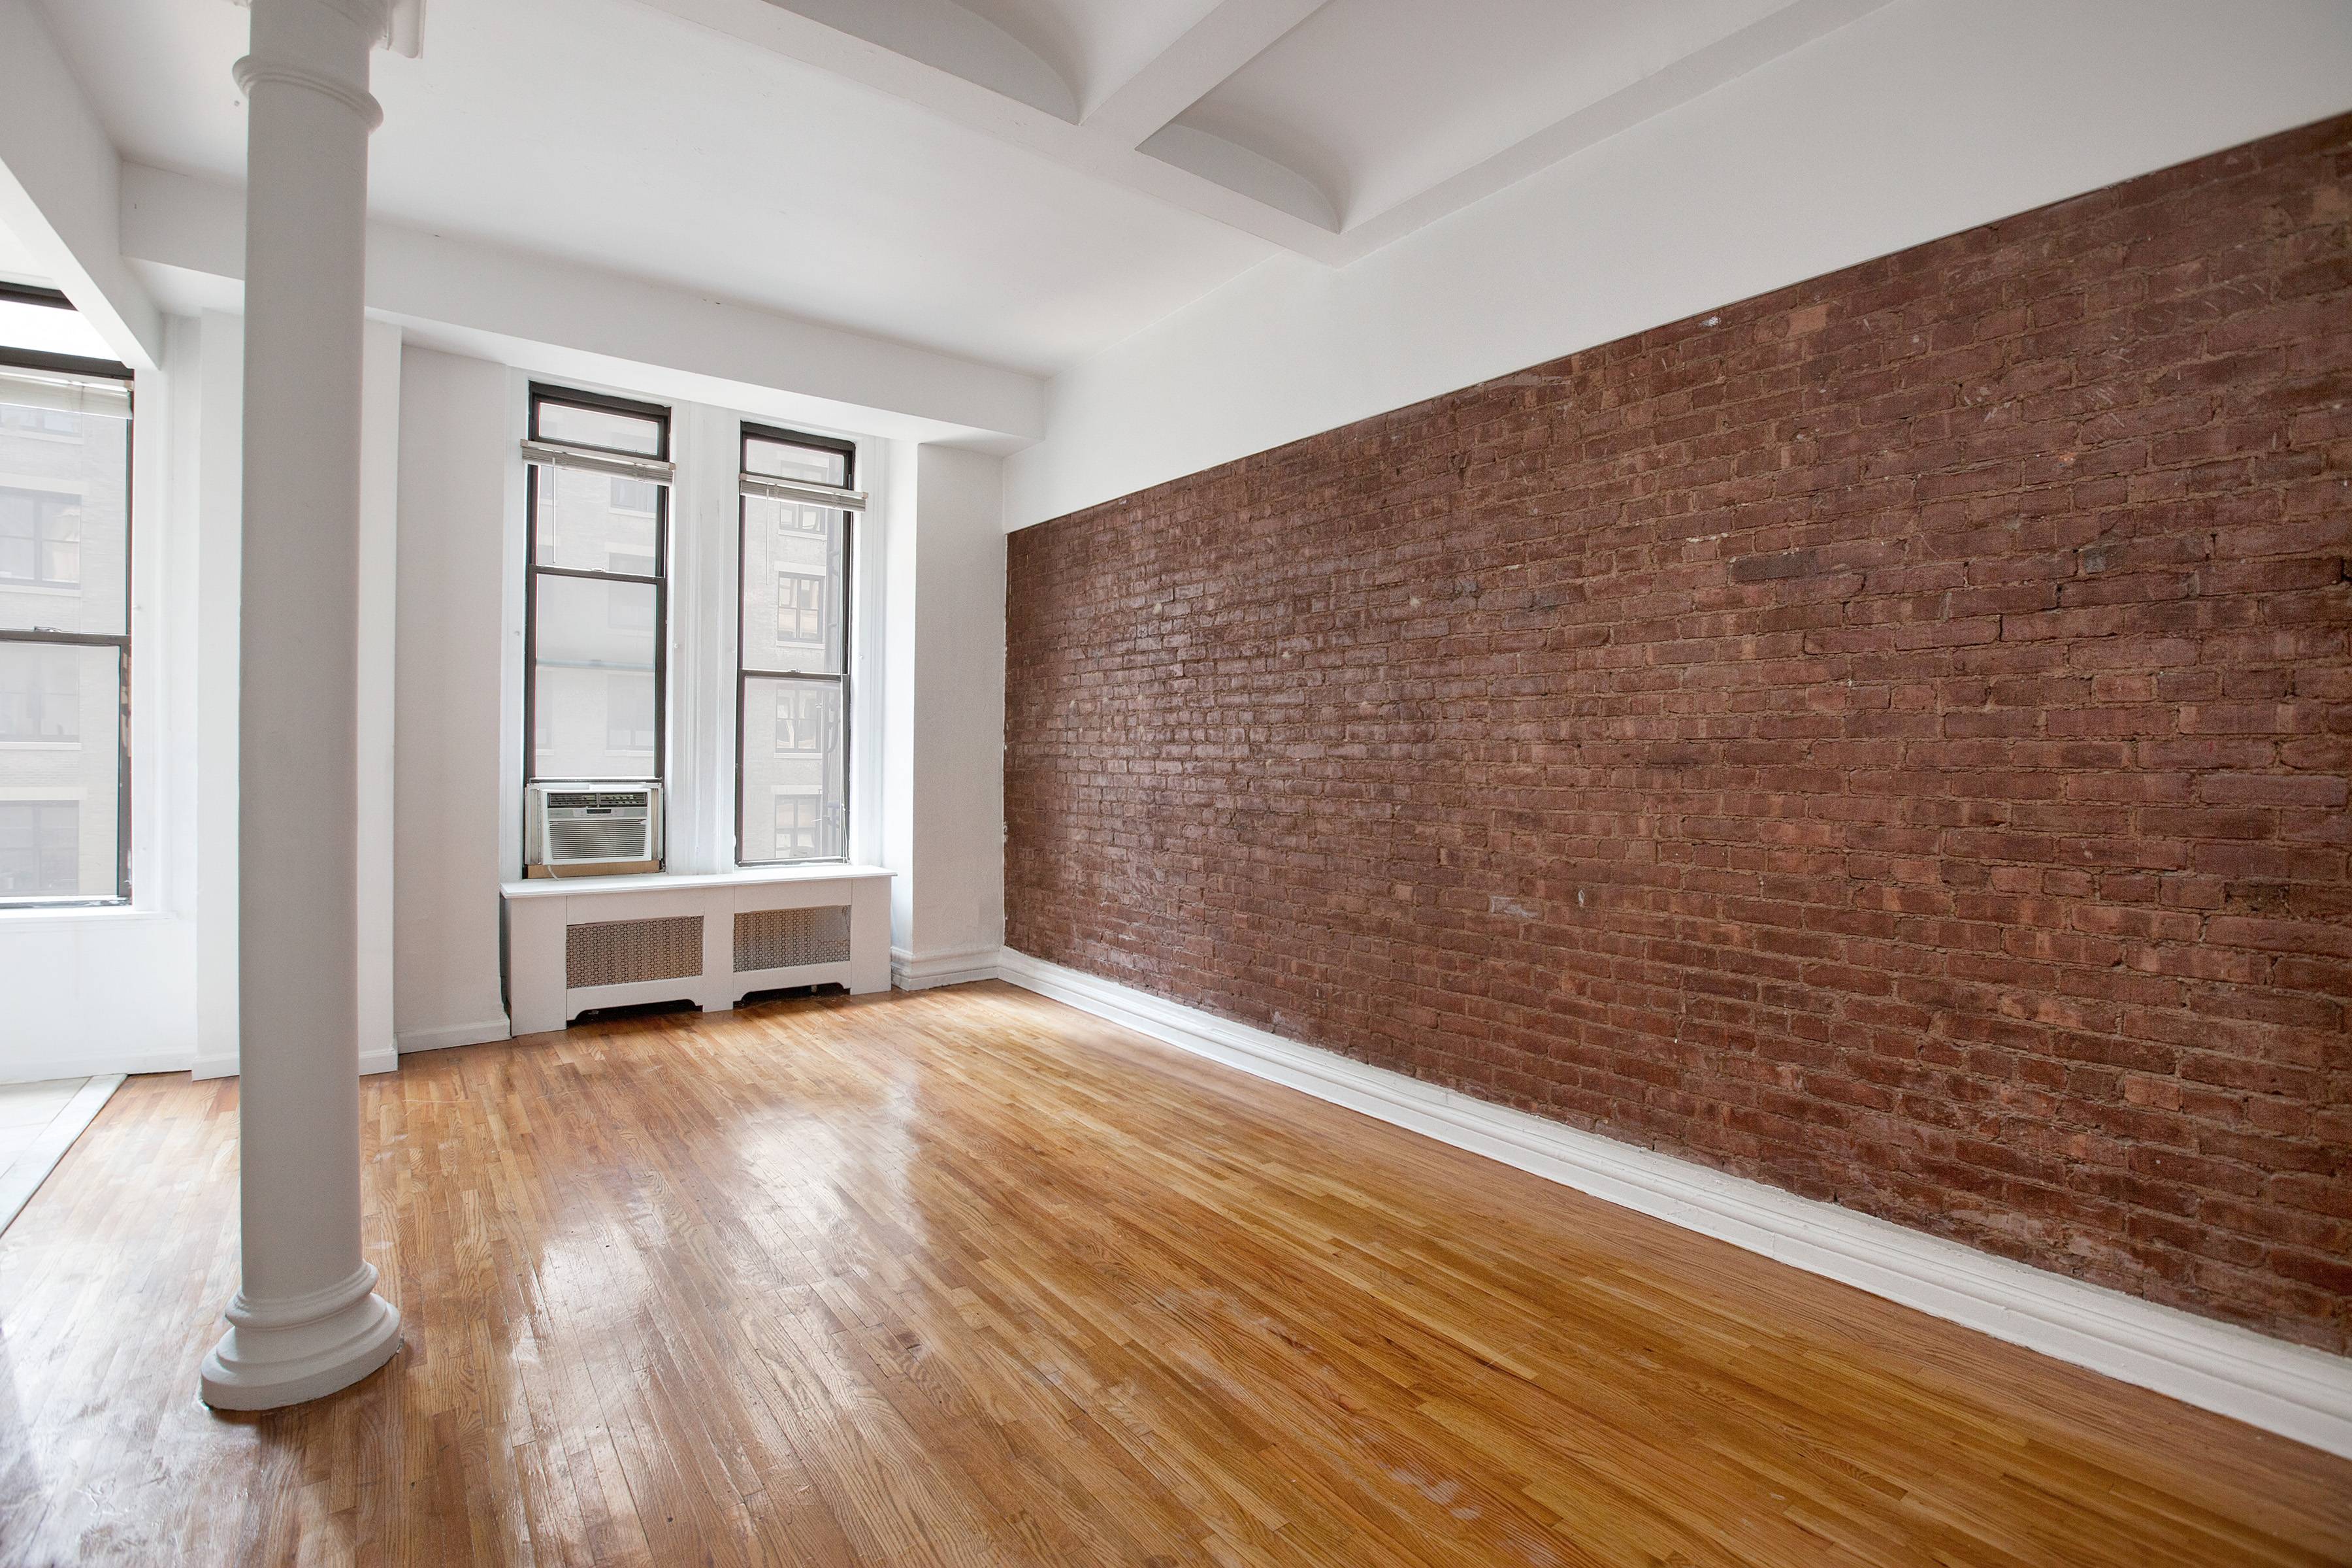 Flatiron LOFT with Park Avenue South View Exposed Brick Over-Sized Windows High Ceilings Pillar One Block To Union Square